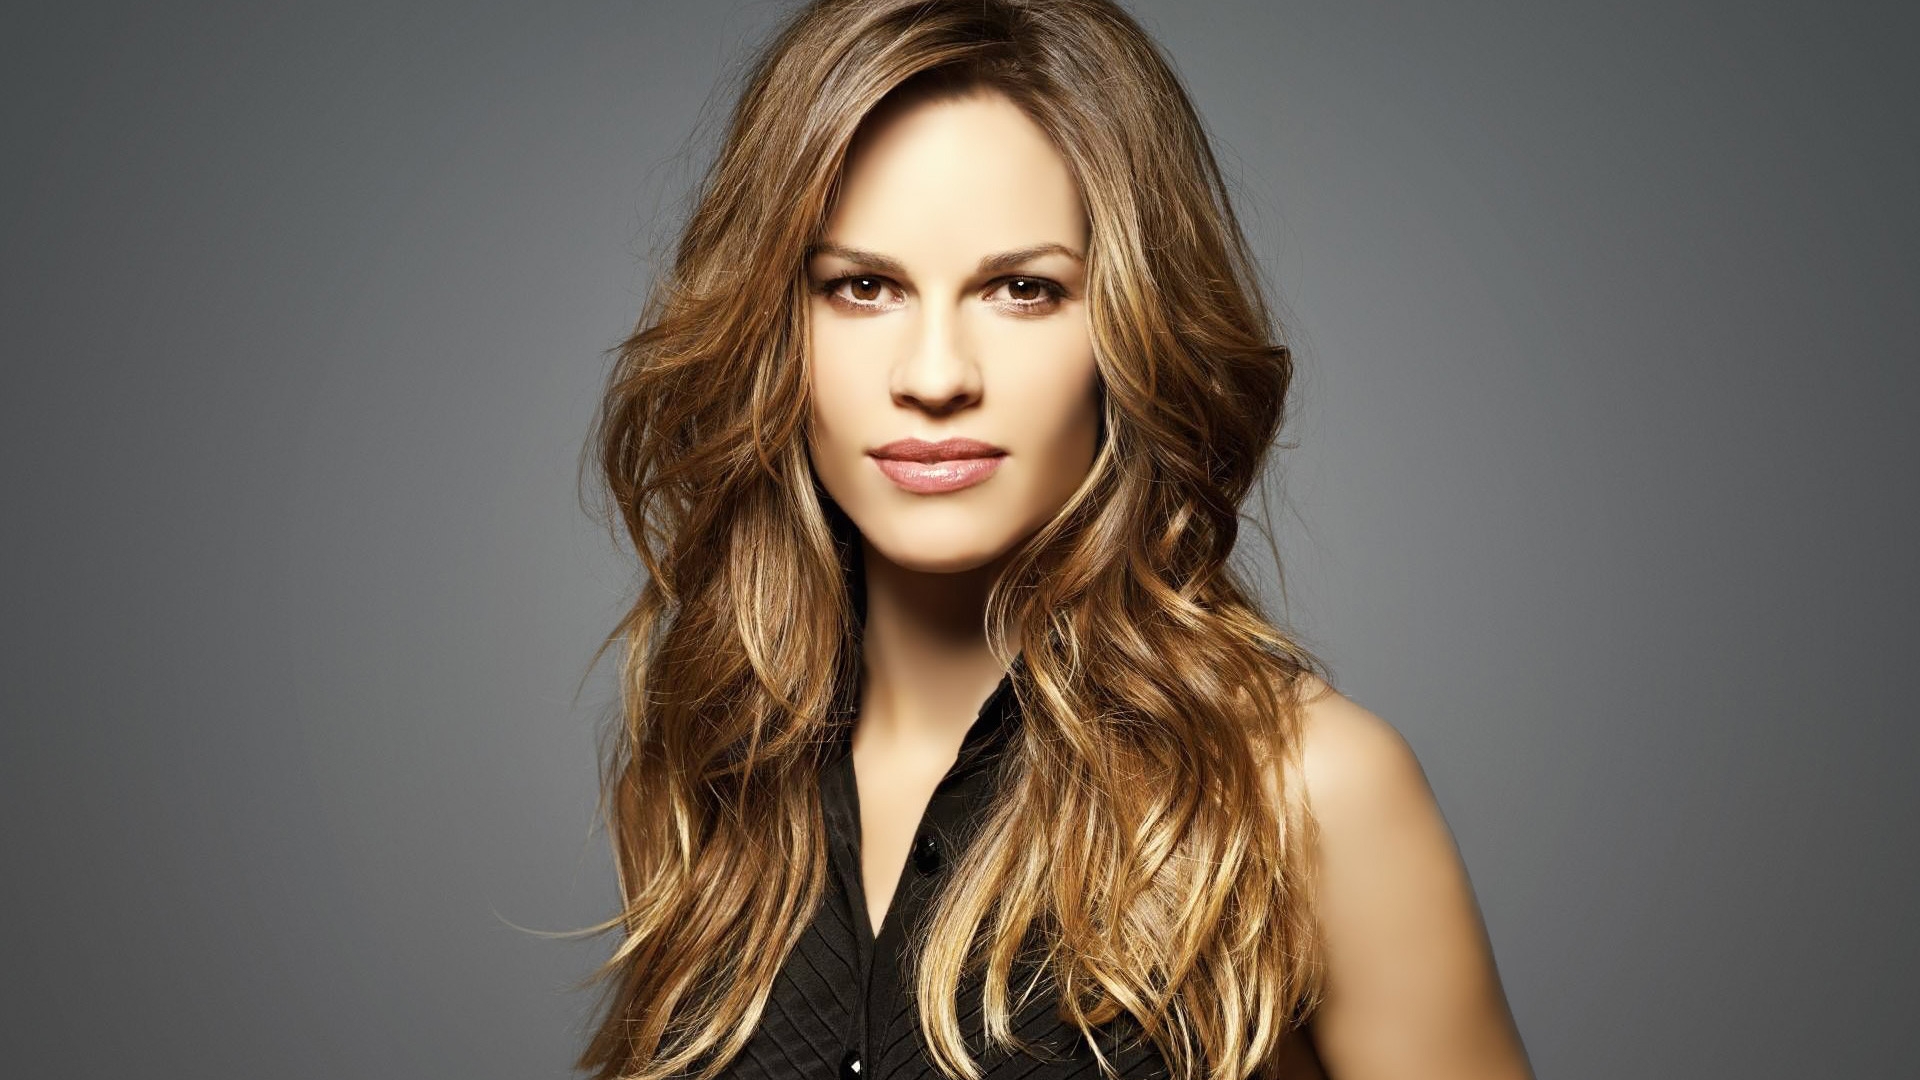 Gorgeous Hilary Swank for 1920 x 1080 HDTV 1080p resolution